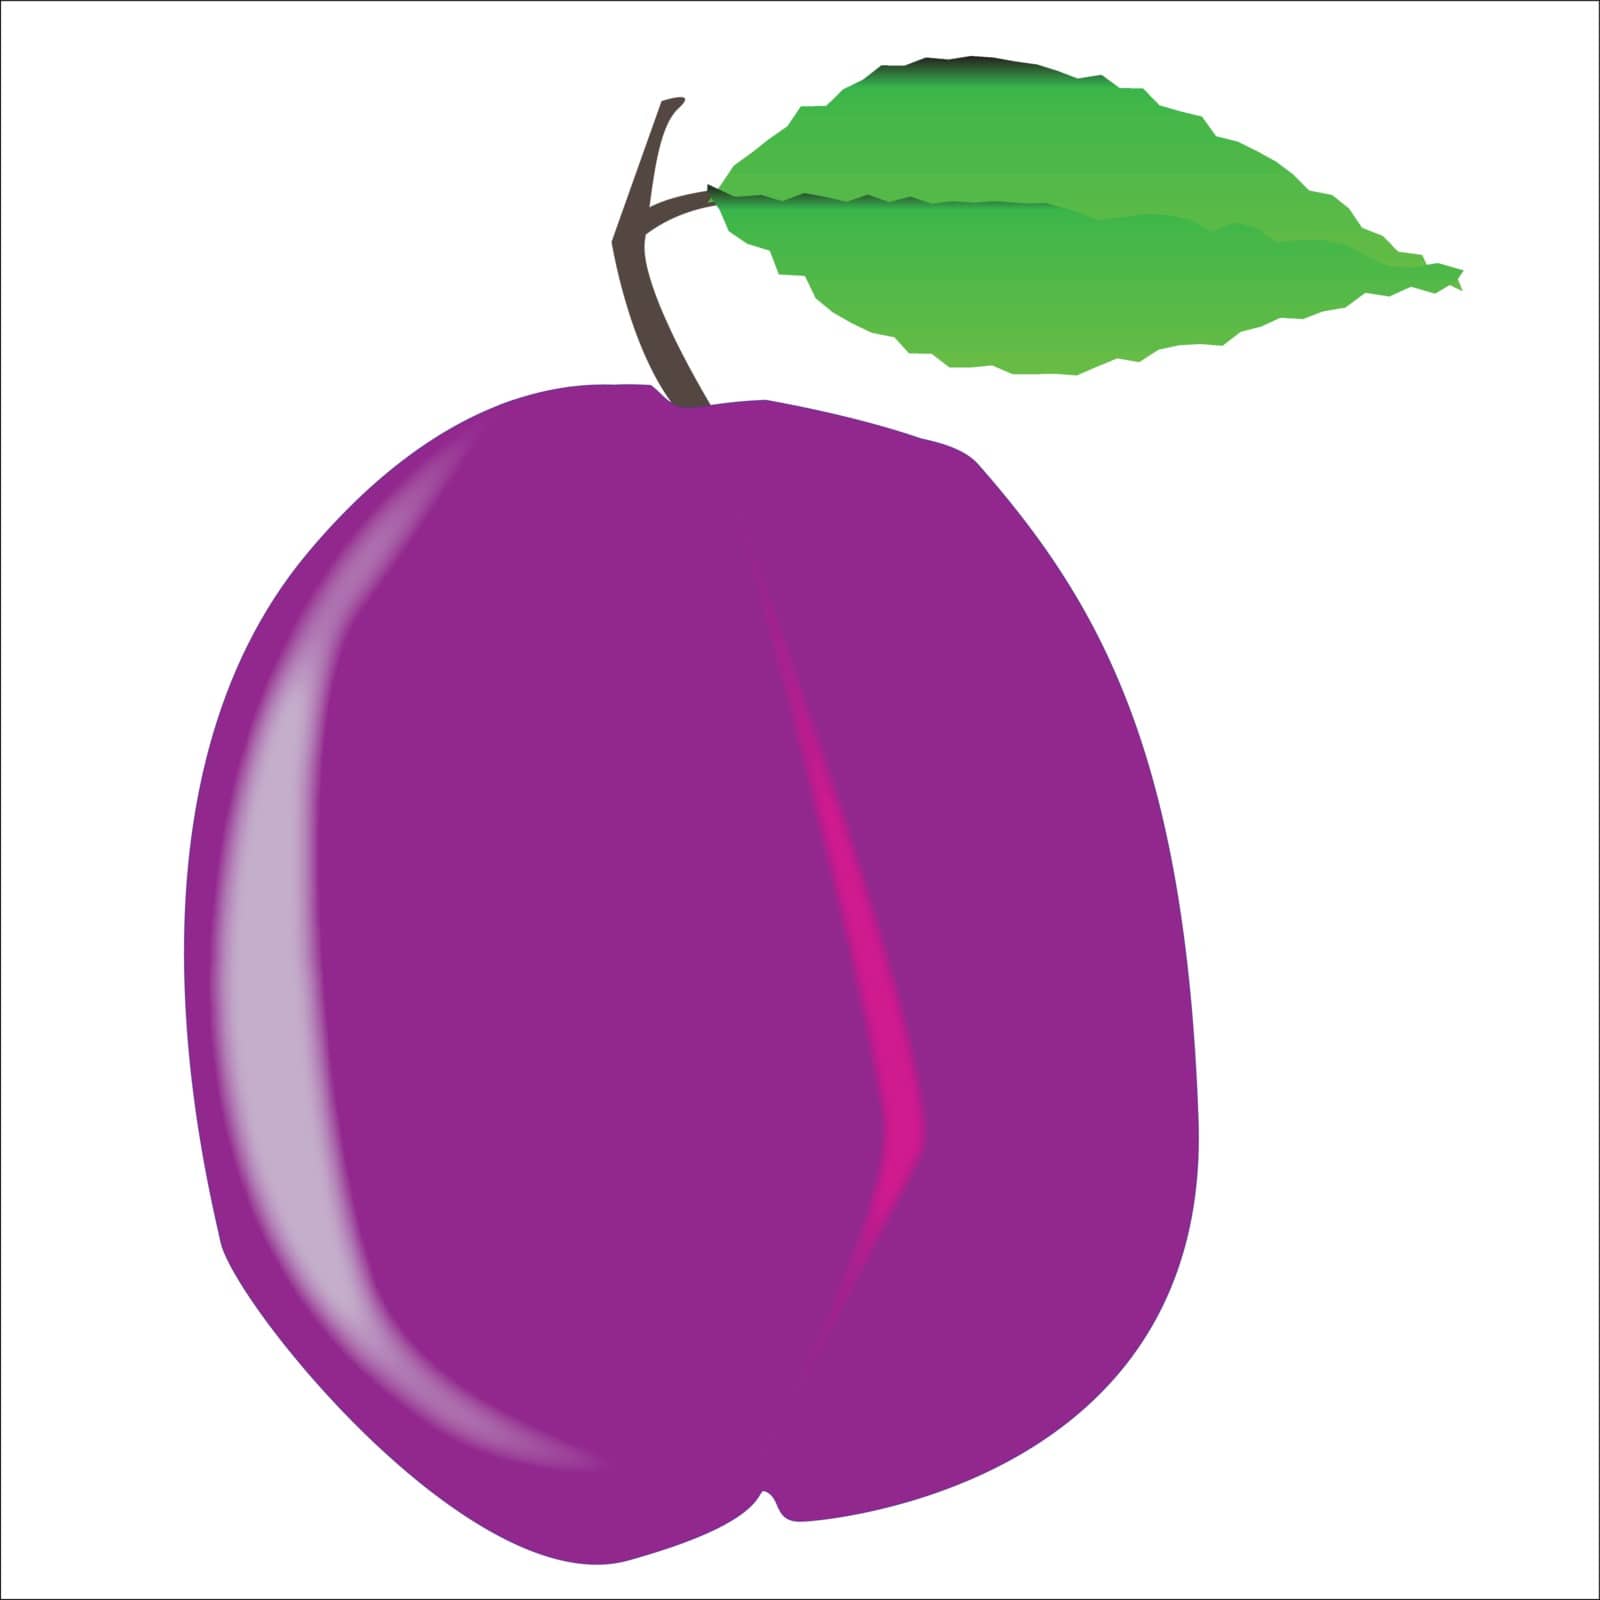 A sole purple isolated plum with green leaf and stalk